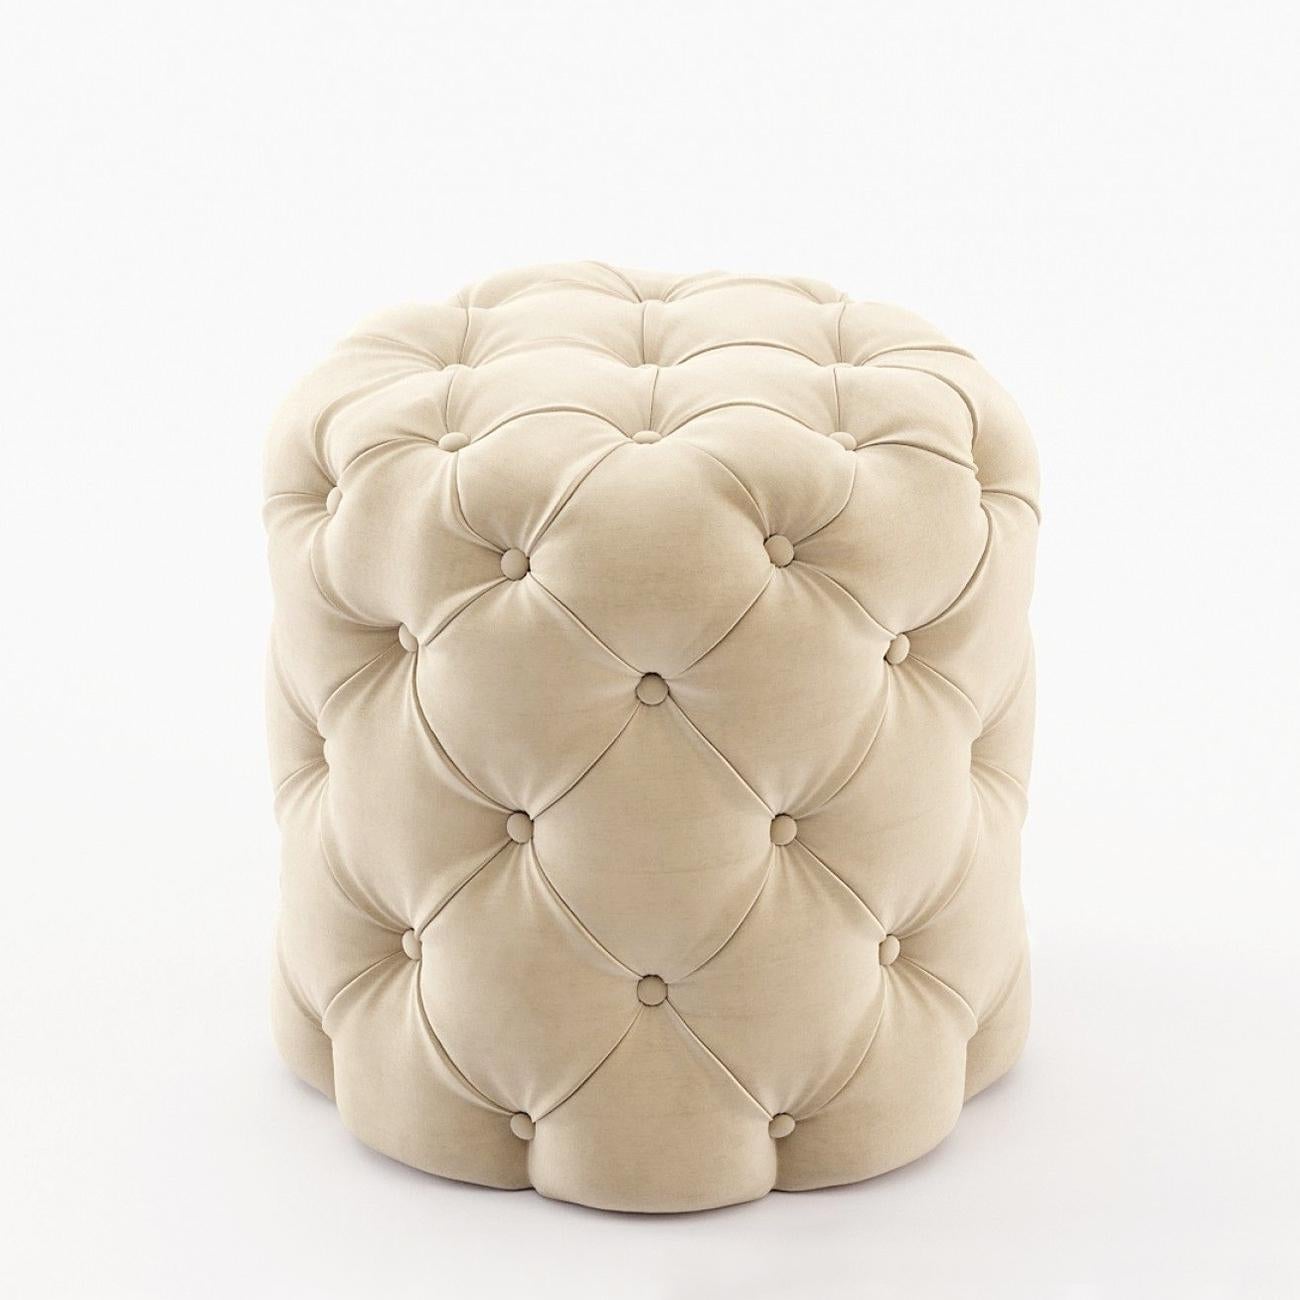 Pouf British Cream upholstered and covered with cream
velvet fabric, capitonated finish with visible buttons.
Also available with other velvet fabrics, on request.